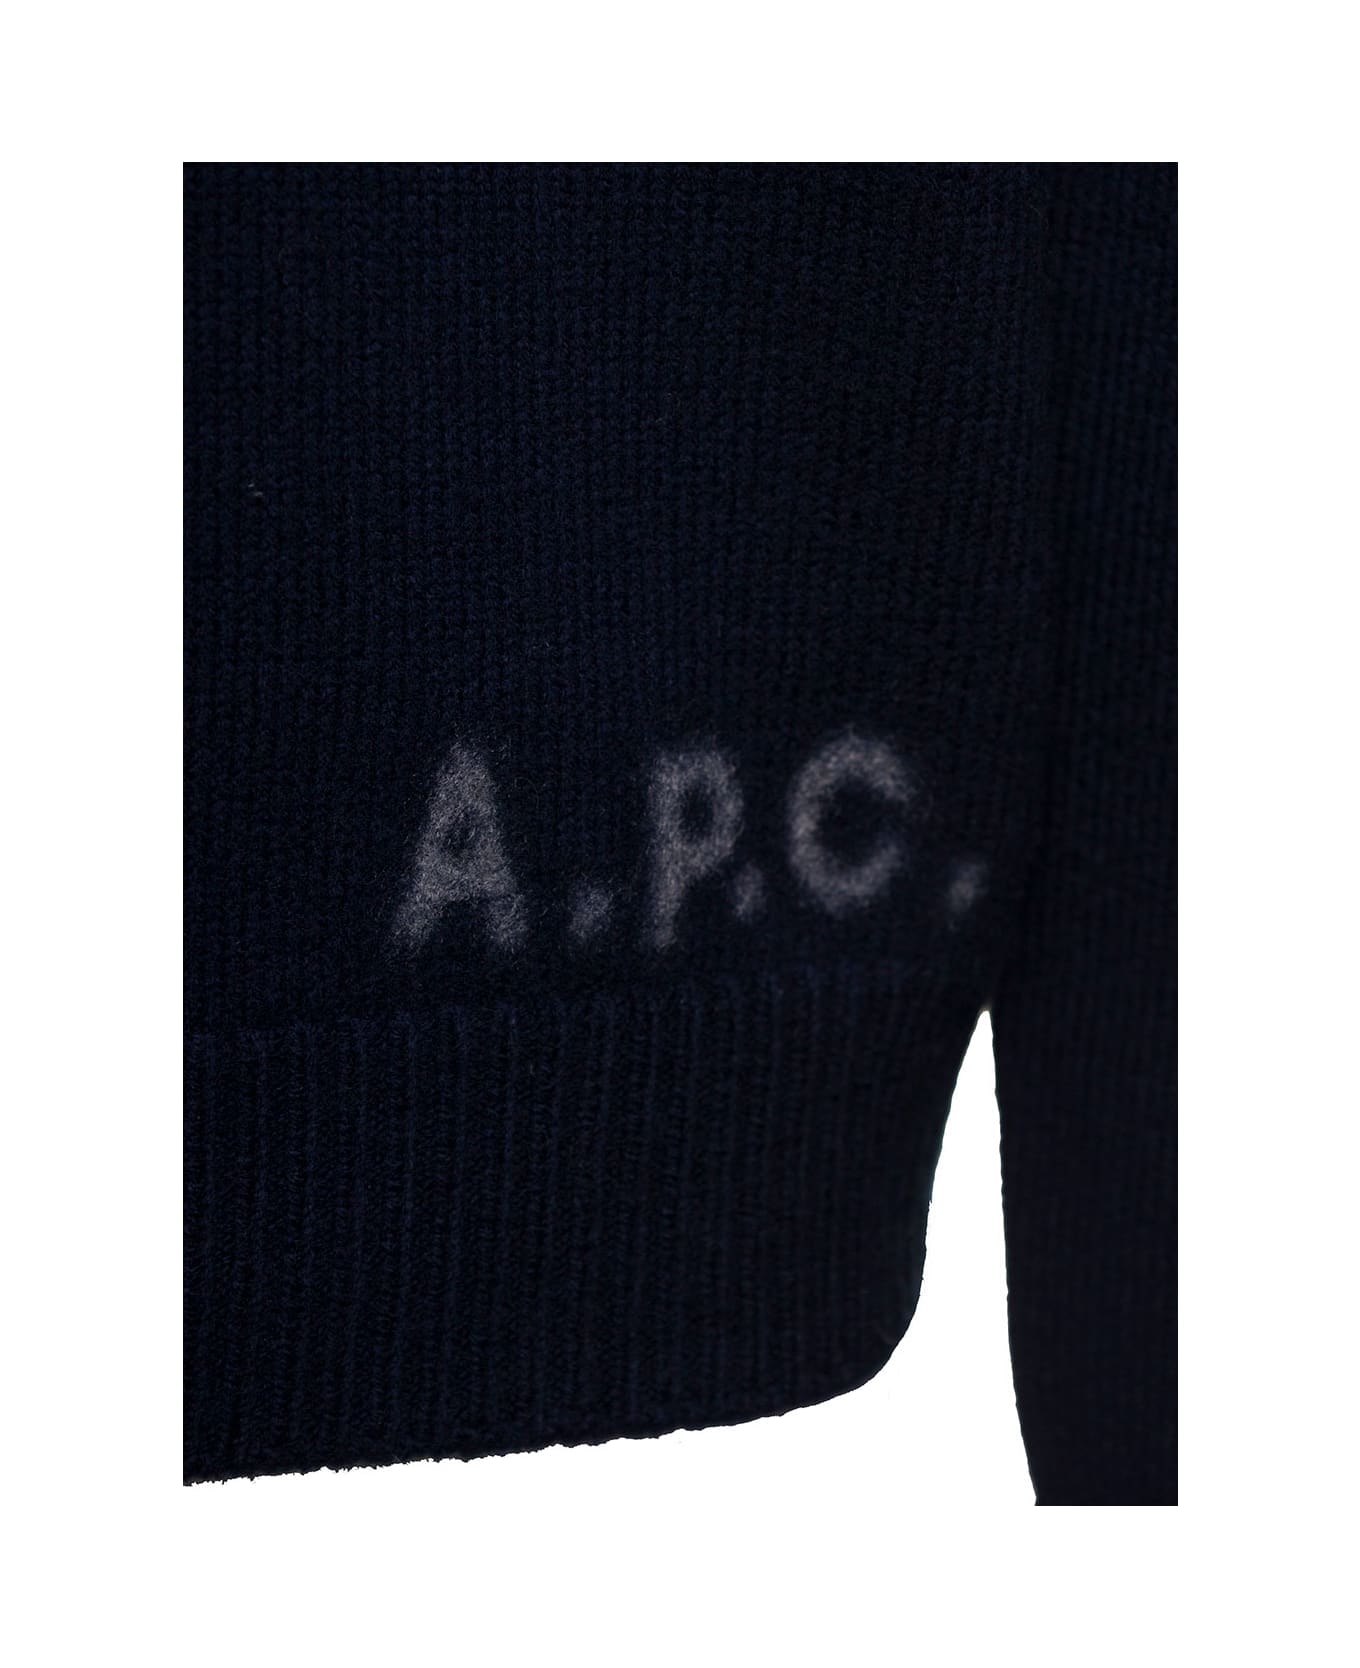 A.P.C. 'edward' Blue Crewneck Sweater With Embroidered Logo In Wool Man - Blu